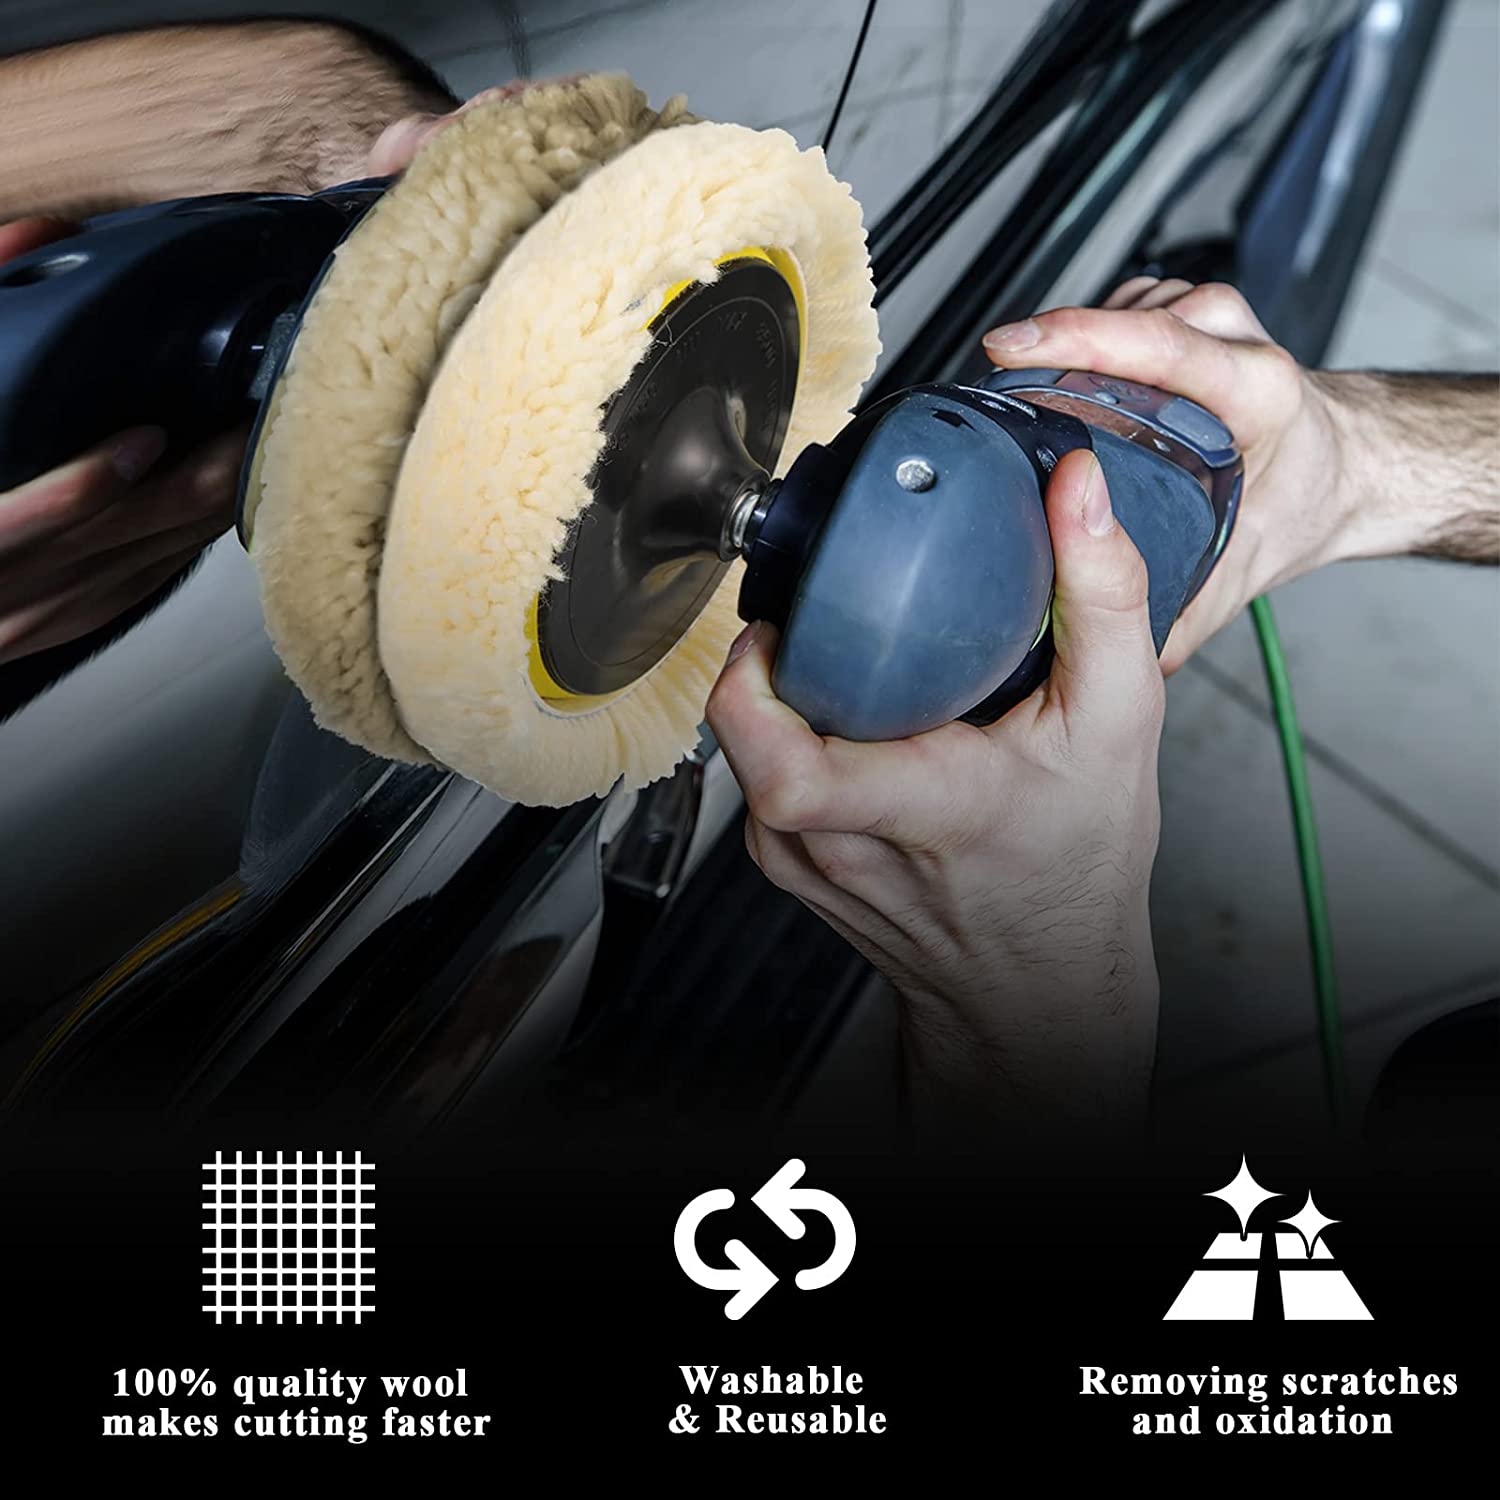 10pcs Polishing Buffing Pads Kit - 6 Inches Car Polishing Wheel for Drill, Car Foam Drill Buffer Sponge Pads Kit with M14 Drill Adapter for Car Care haimian